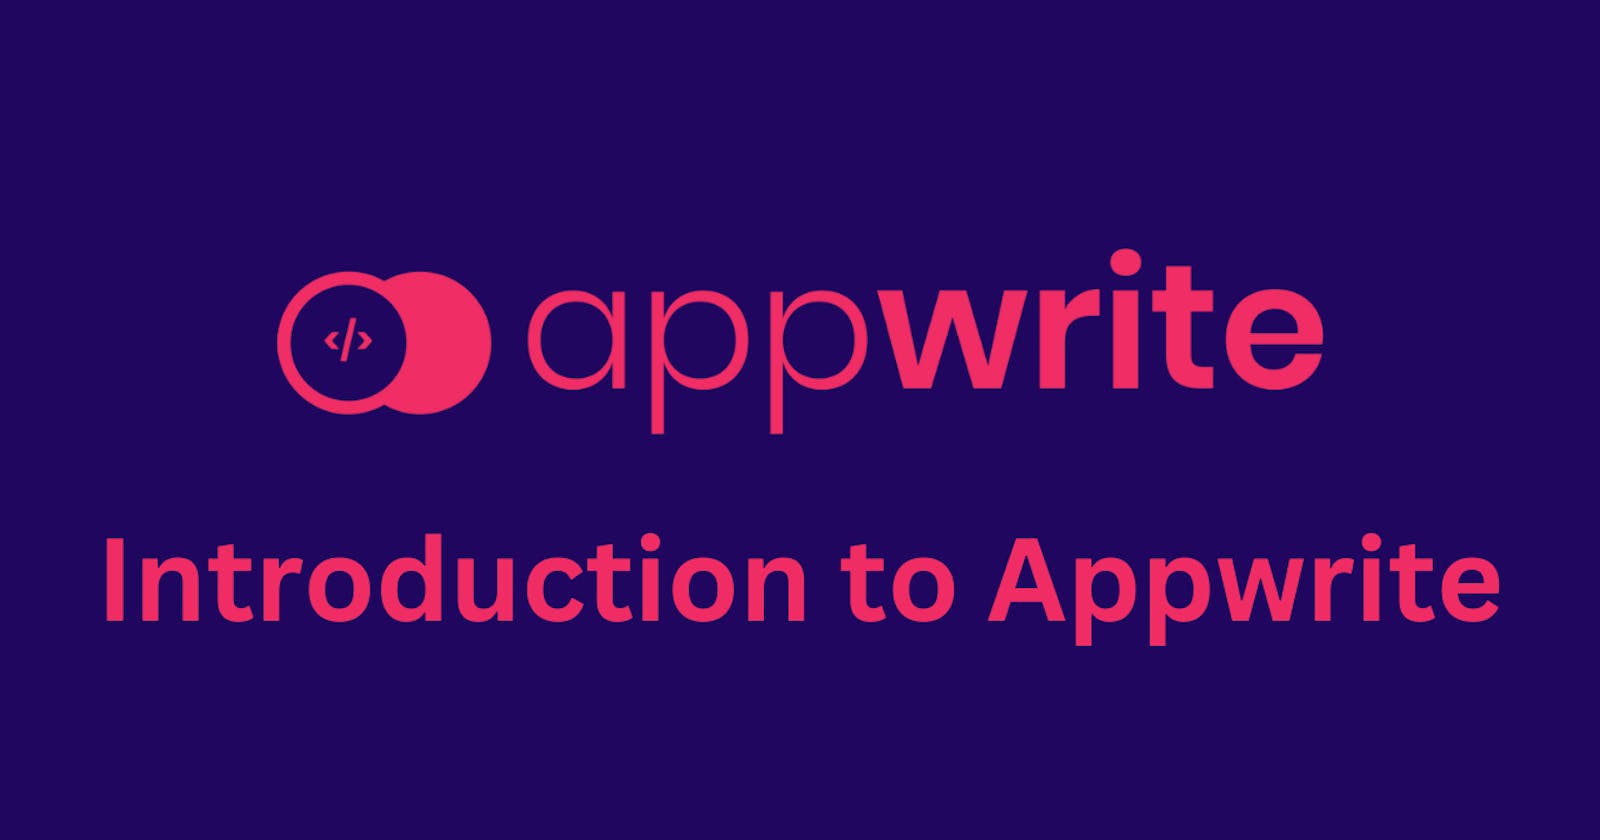 Appwrite: An Introduction